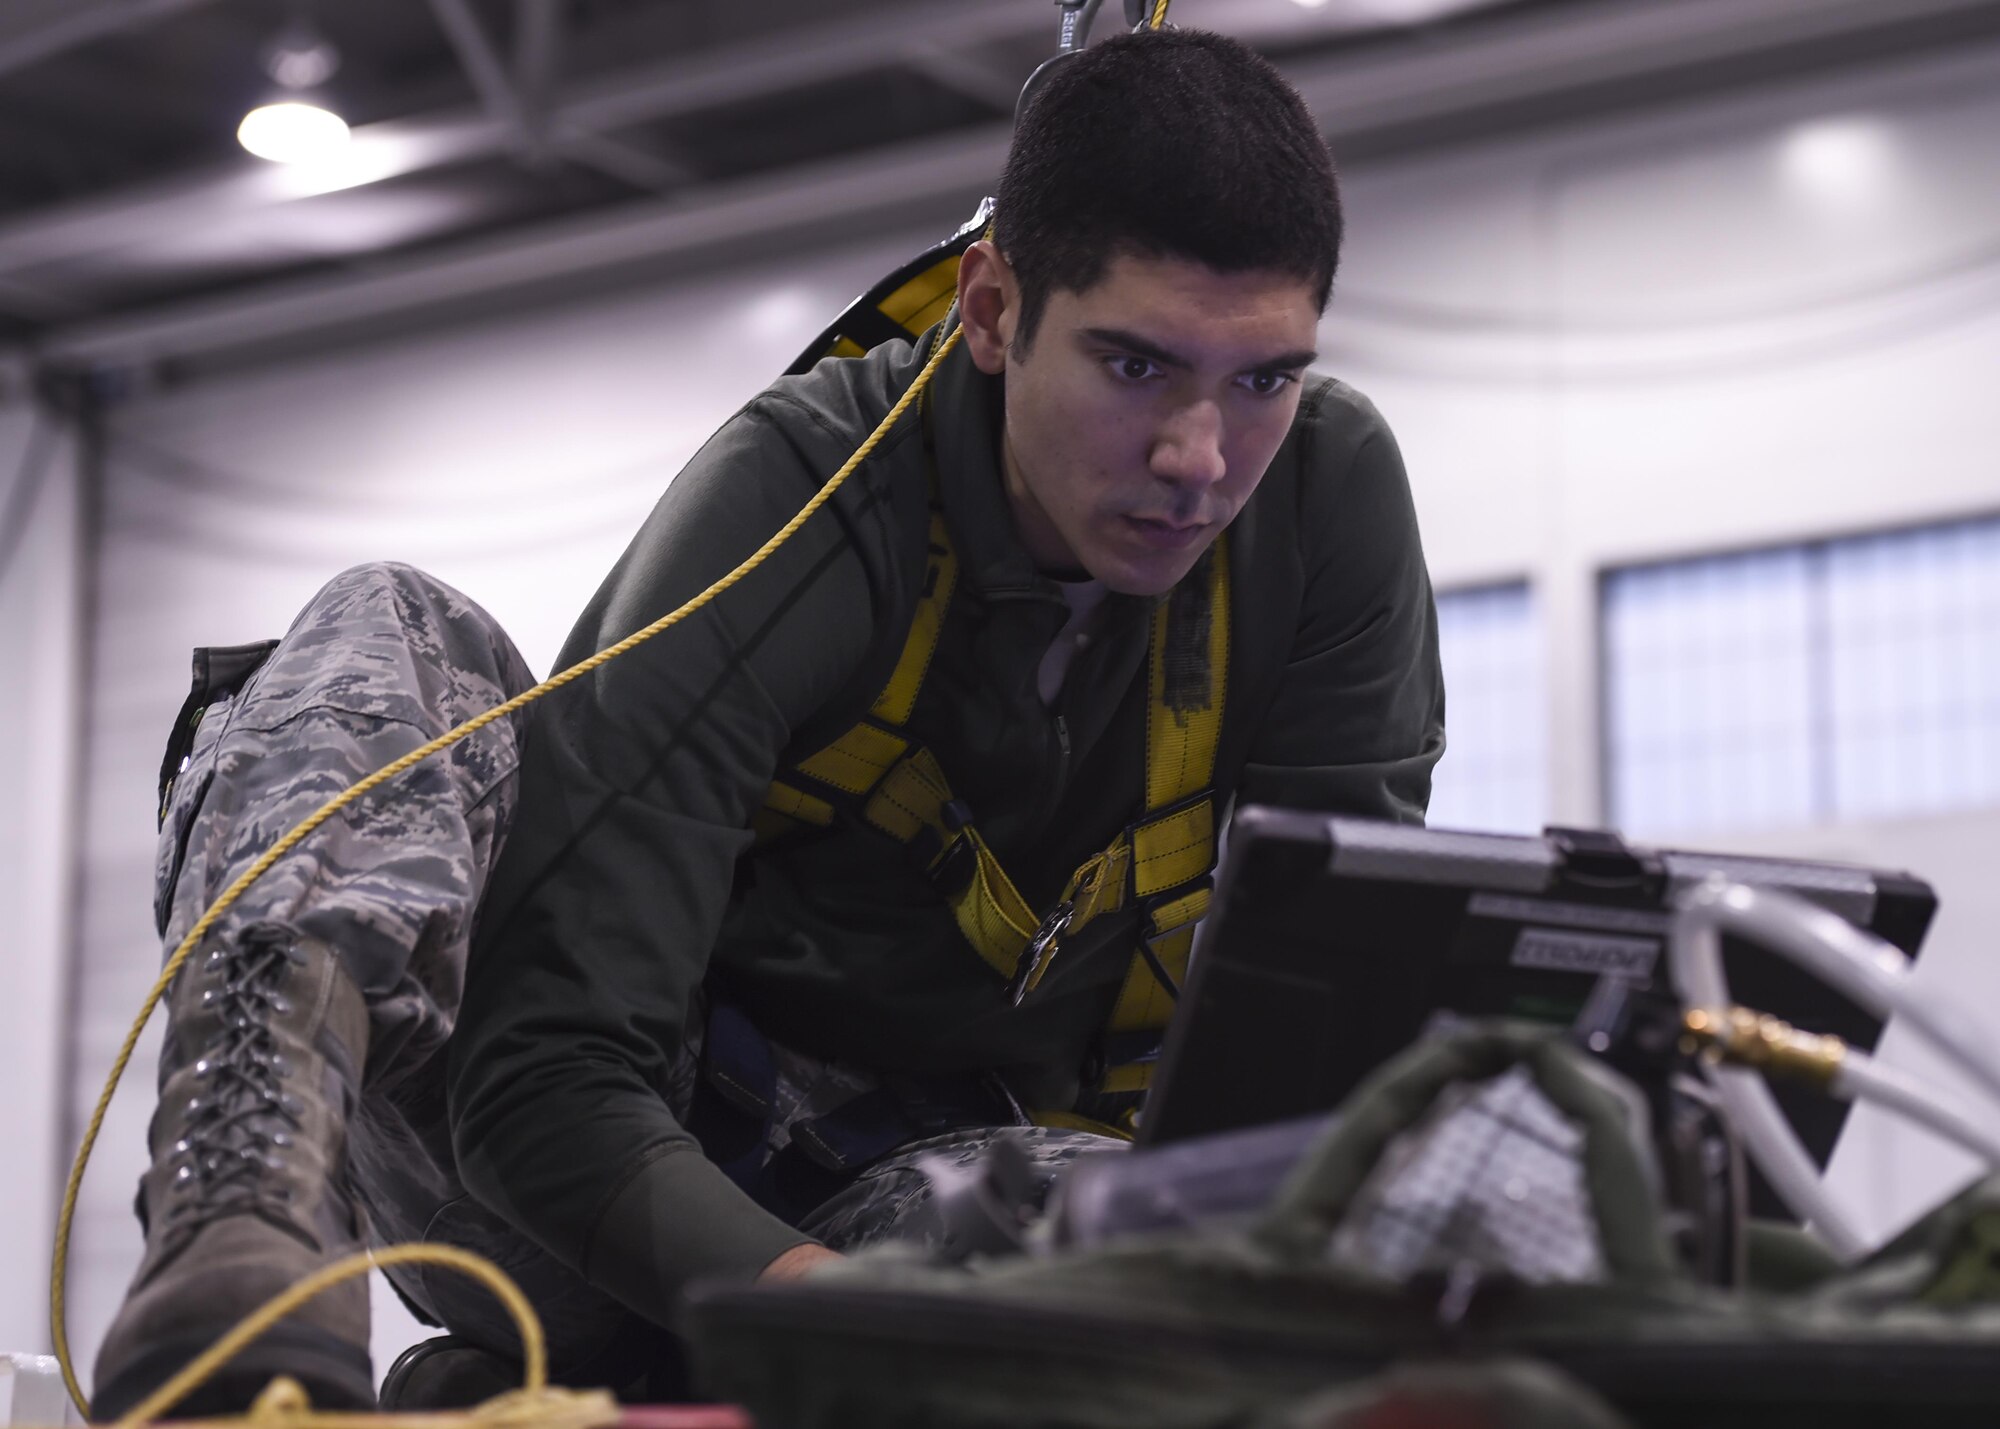 U.S. Air Force Senior Airman Leonard Miller, 19th Maintenance Squadron fuel systems repair craftsman, performs a diagnostics check on a C-130J fuel cell system Dec. 5, 2016, in Hangar 232 on Little Rock Air Force Base, Ark. An average of three-to-four aircraft are inspected and repaired weekly by fuels Airmen. (U.S. Air Force photo/Senior Airman Harry Brexel)